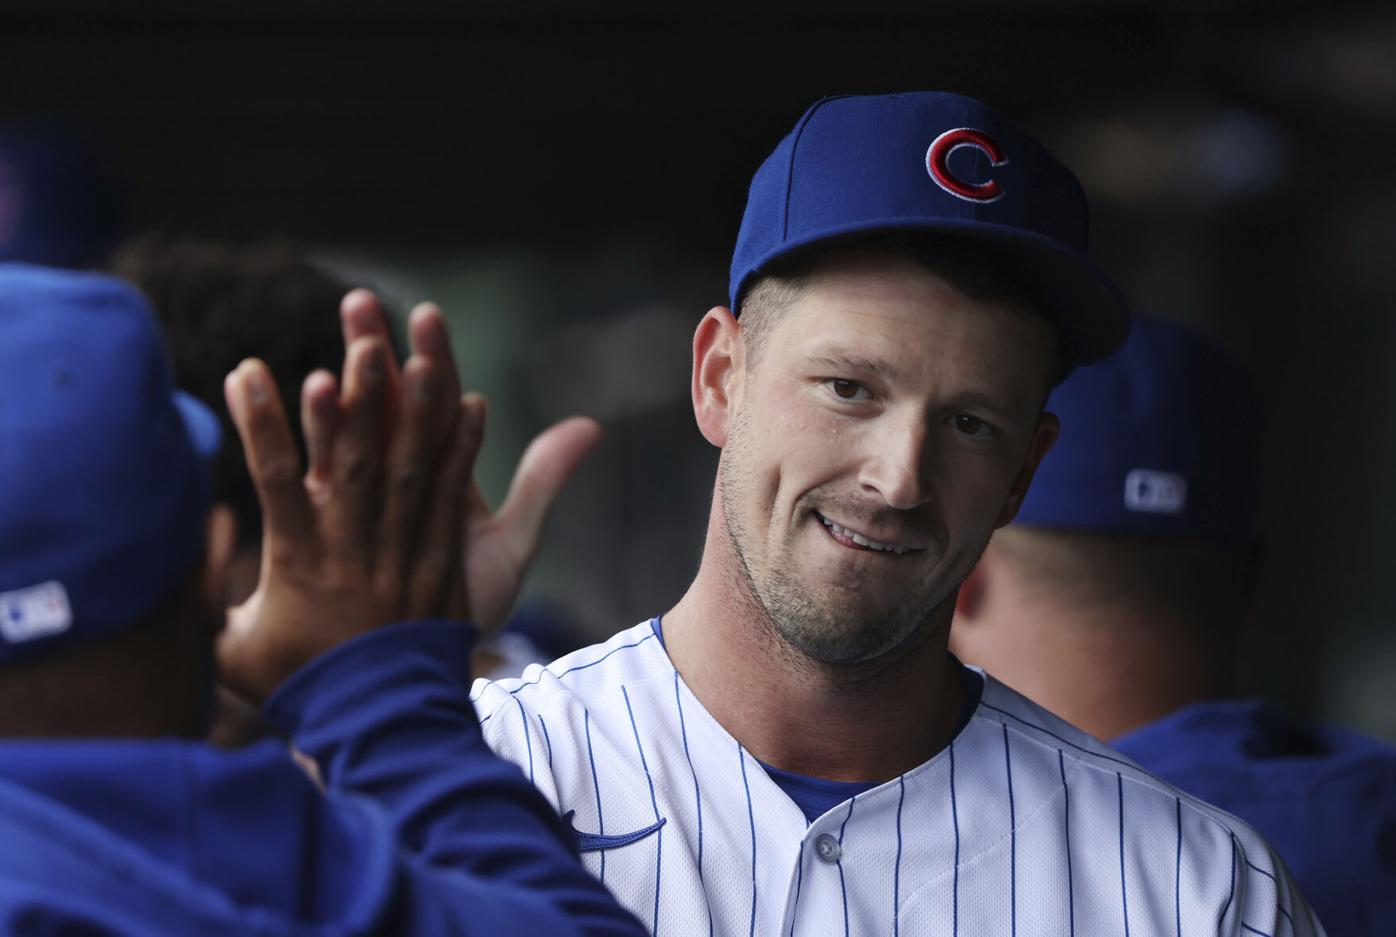 Cubs' Drew Smyly loses perfect game bid in heartbreaking fashion